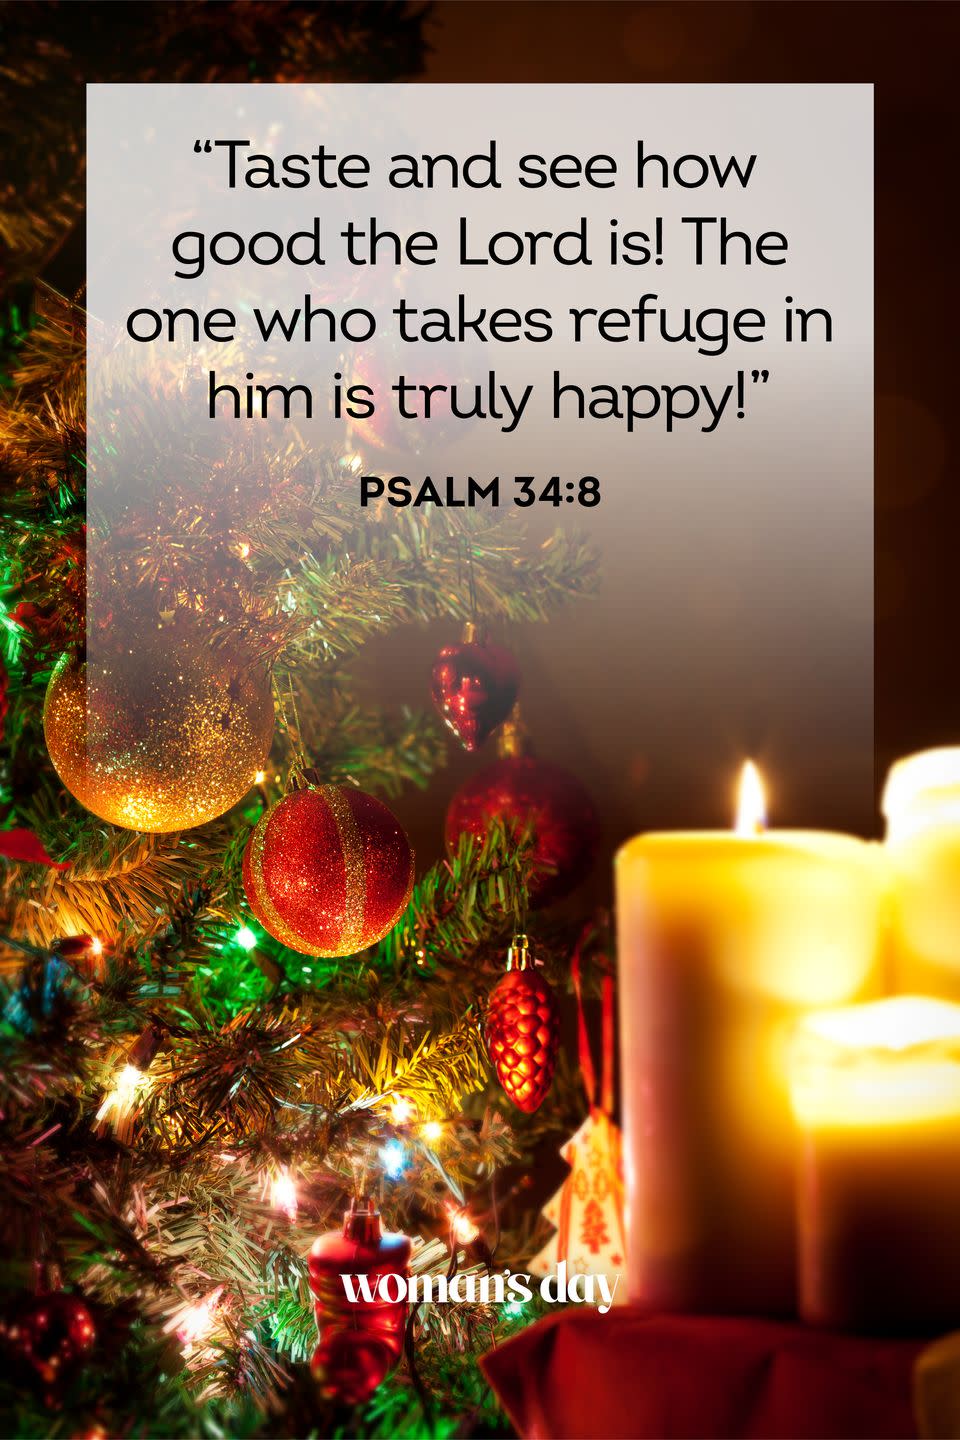 <p>“Taste and see how good the Lord is! The one who takes refuge in him is truly happy!”</p><p><strong>The Good News:</strong> If you have faith in God and celebrate him (at Christmas, but also year-round), you’ll experience real joy. </p>